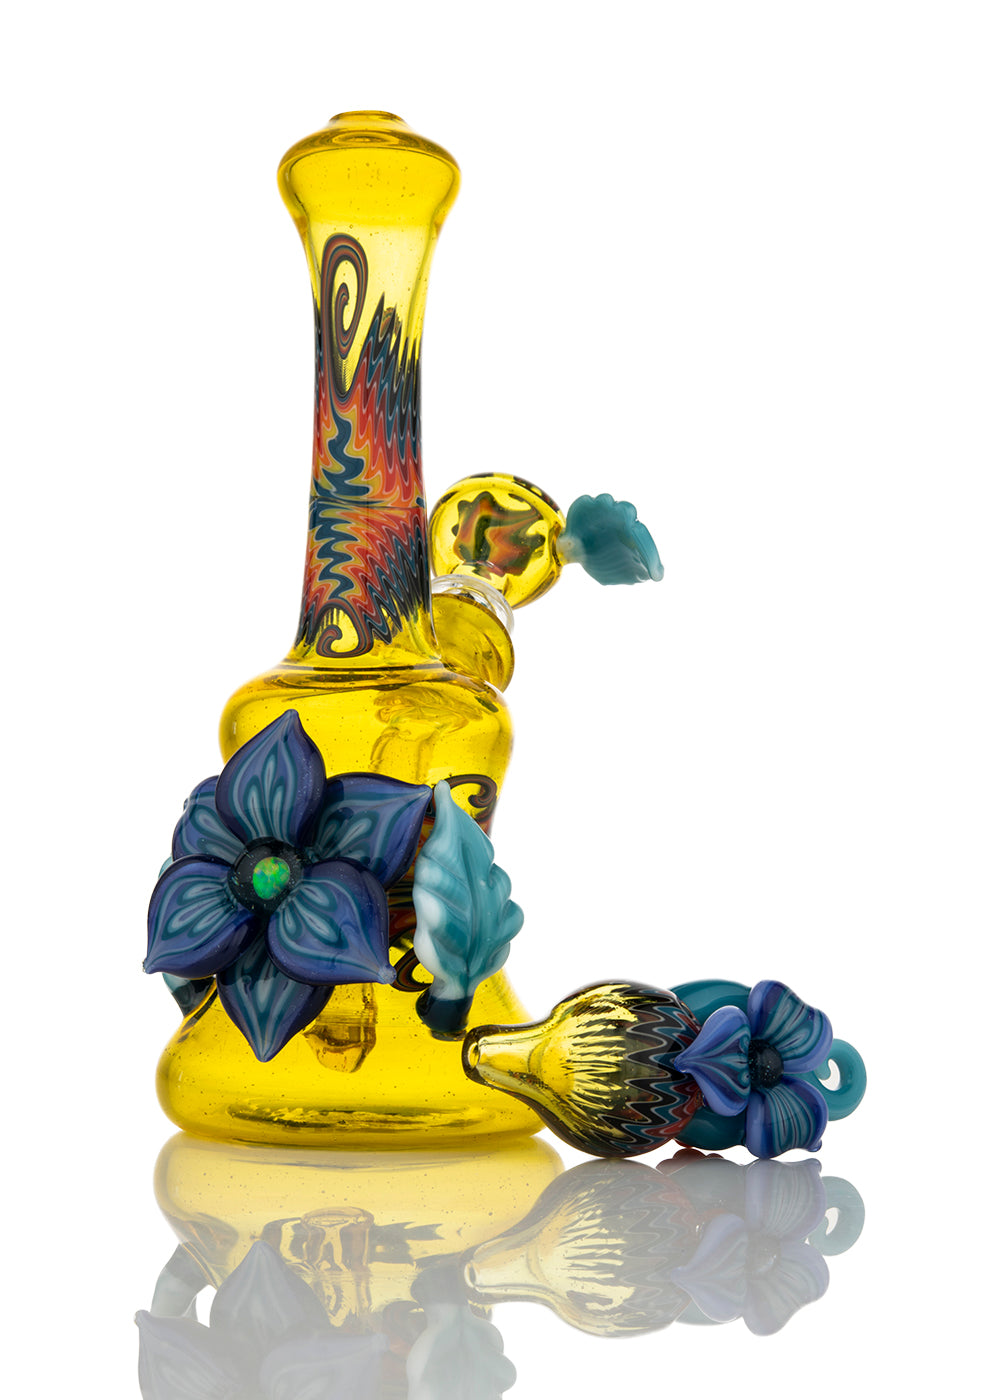 Terps and Rainbow CFL Mini Tube with Matching Slide and Bubble Cap by Blossom Glass